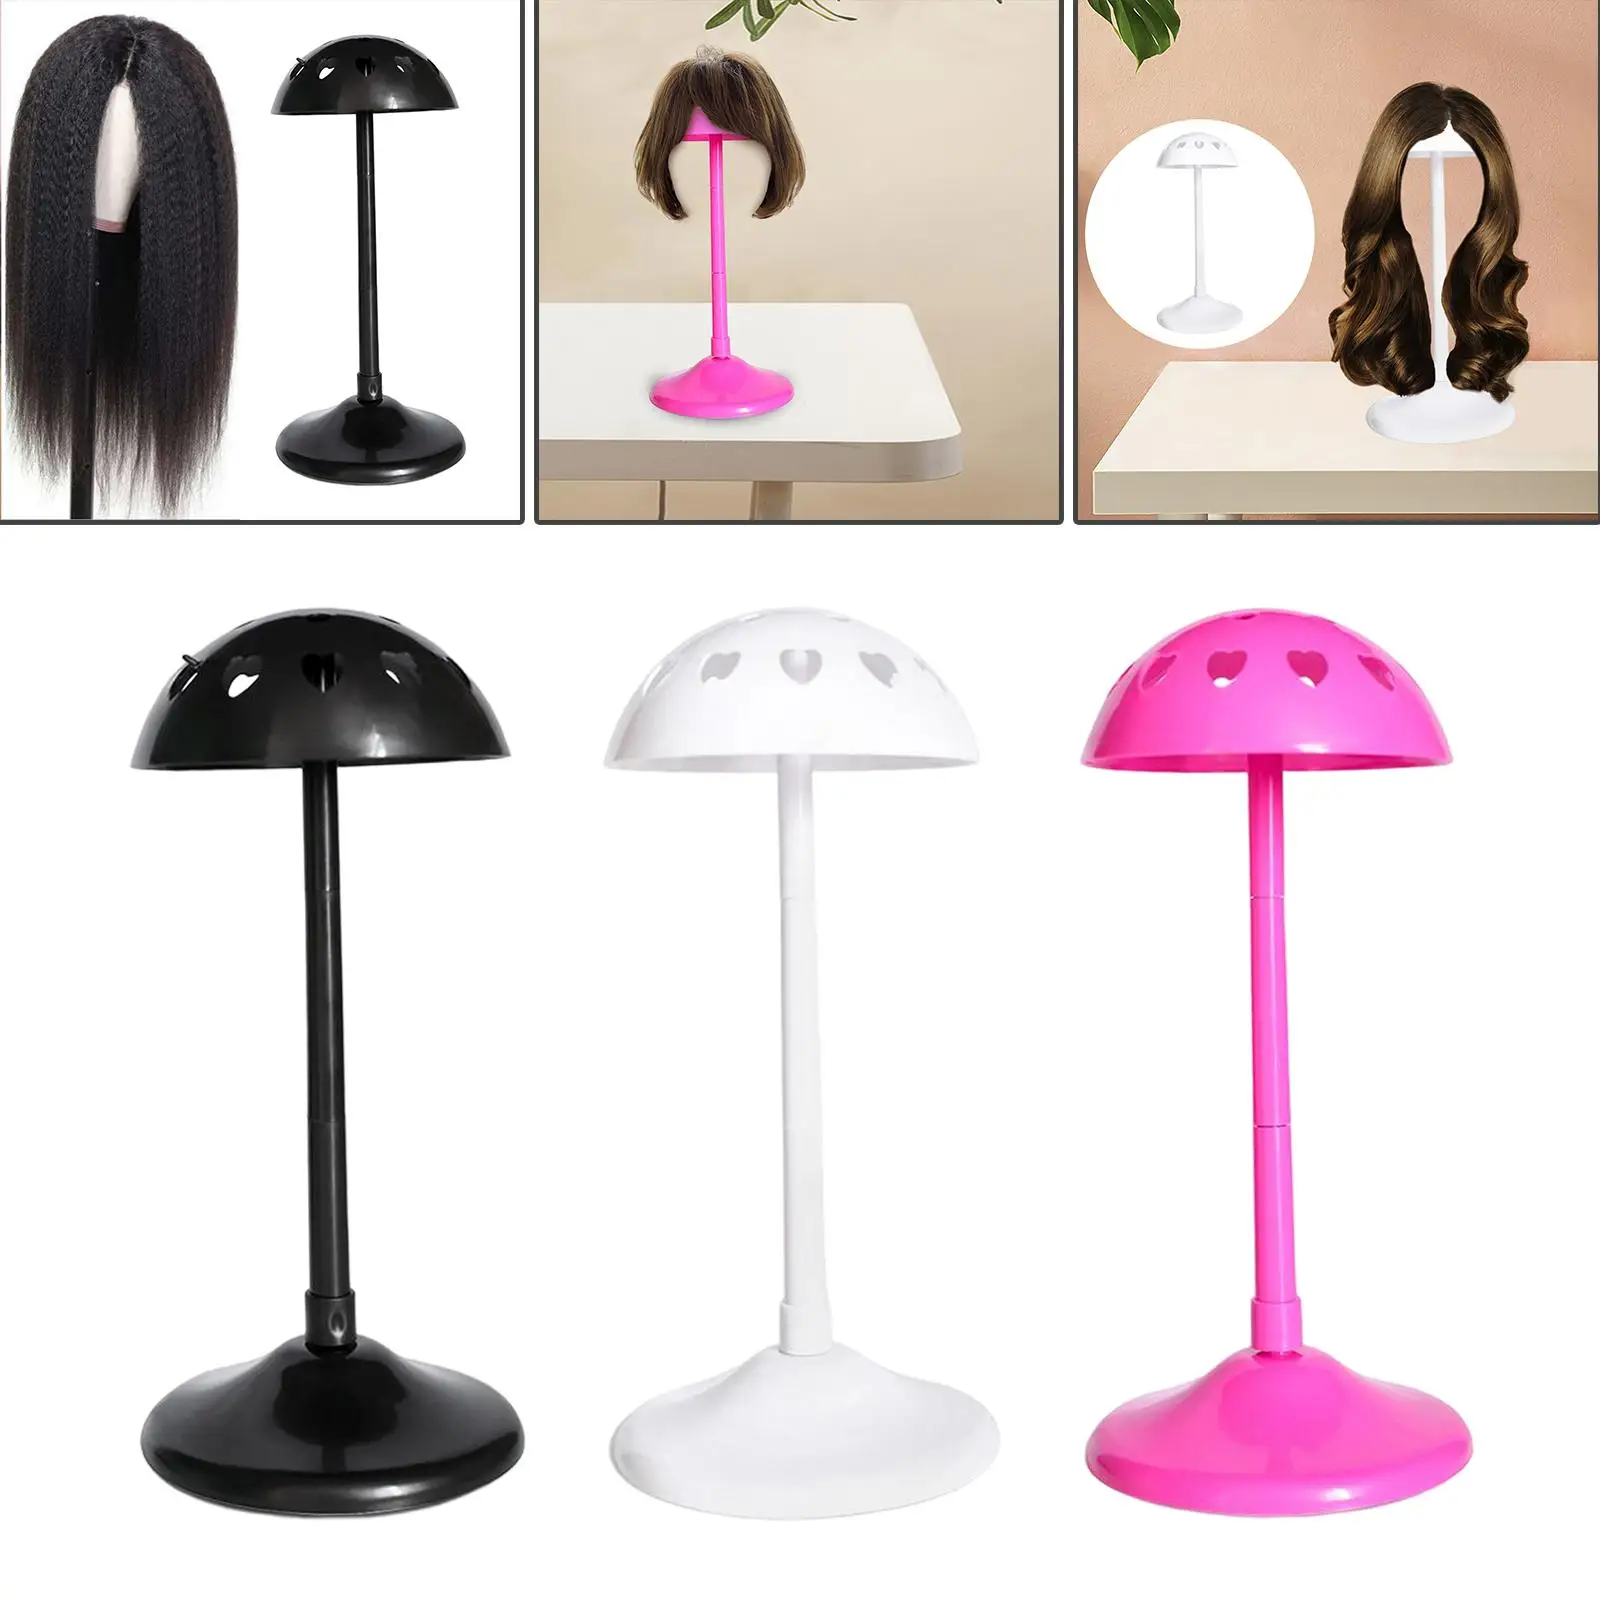 PP Hat Display Stand Adjustable Height for Hair Styling Drying Hat Storage Cute Shape